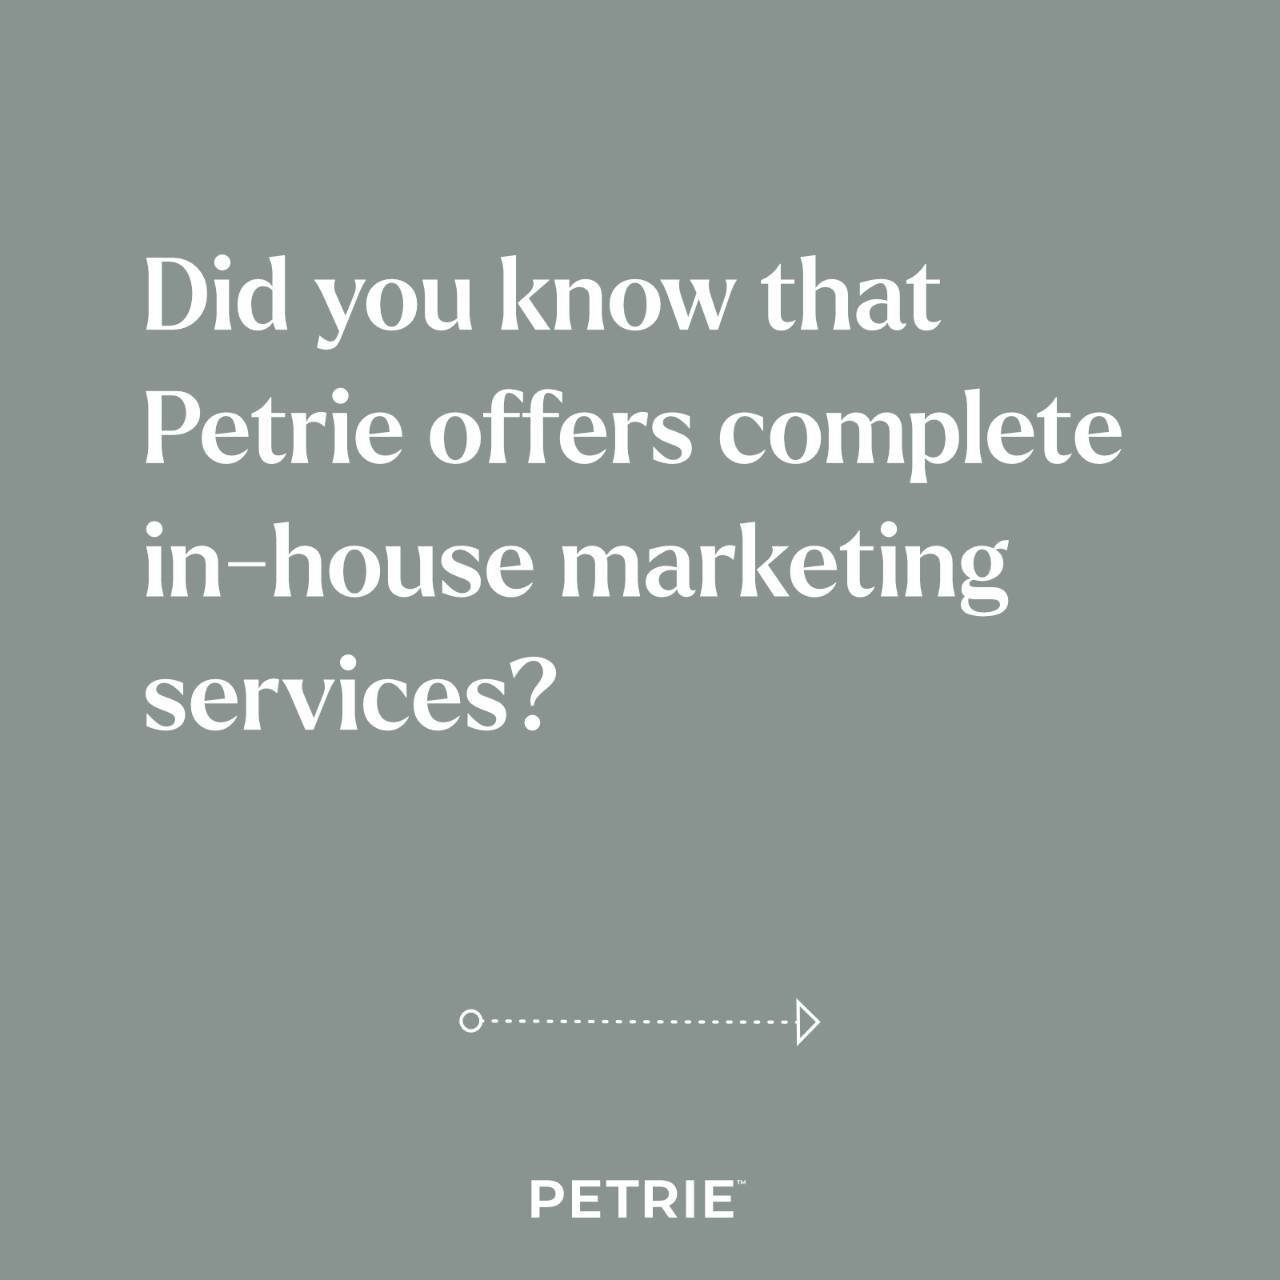 Did you know that Petrie offers complete in-house marketing services for property developments?

Our extensive development experience means we know what marketing is needed for each project, no matter how big or small they are. 

We analyse each proj